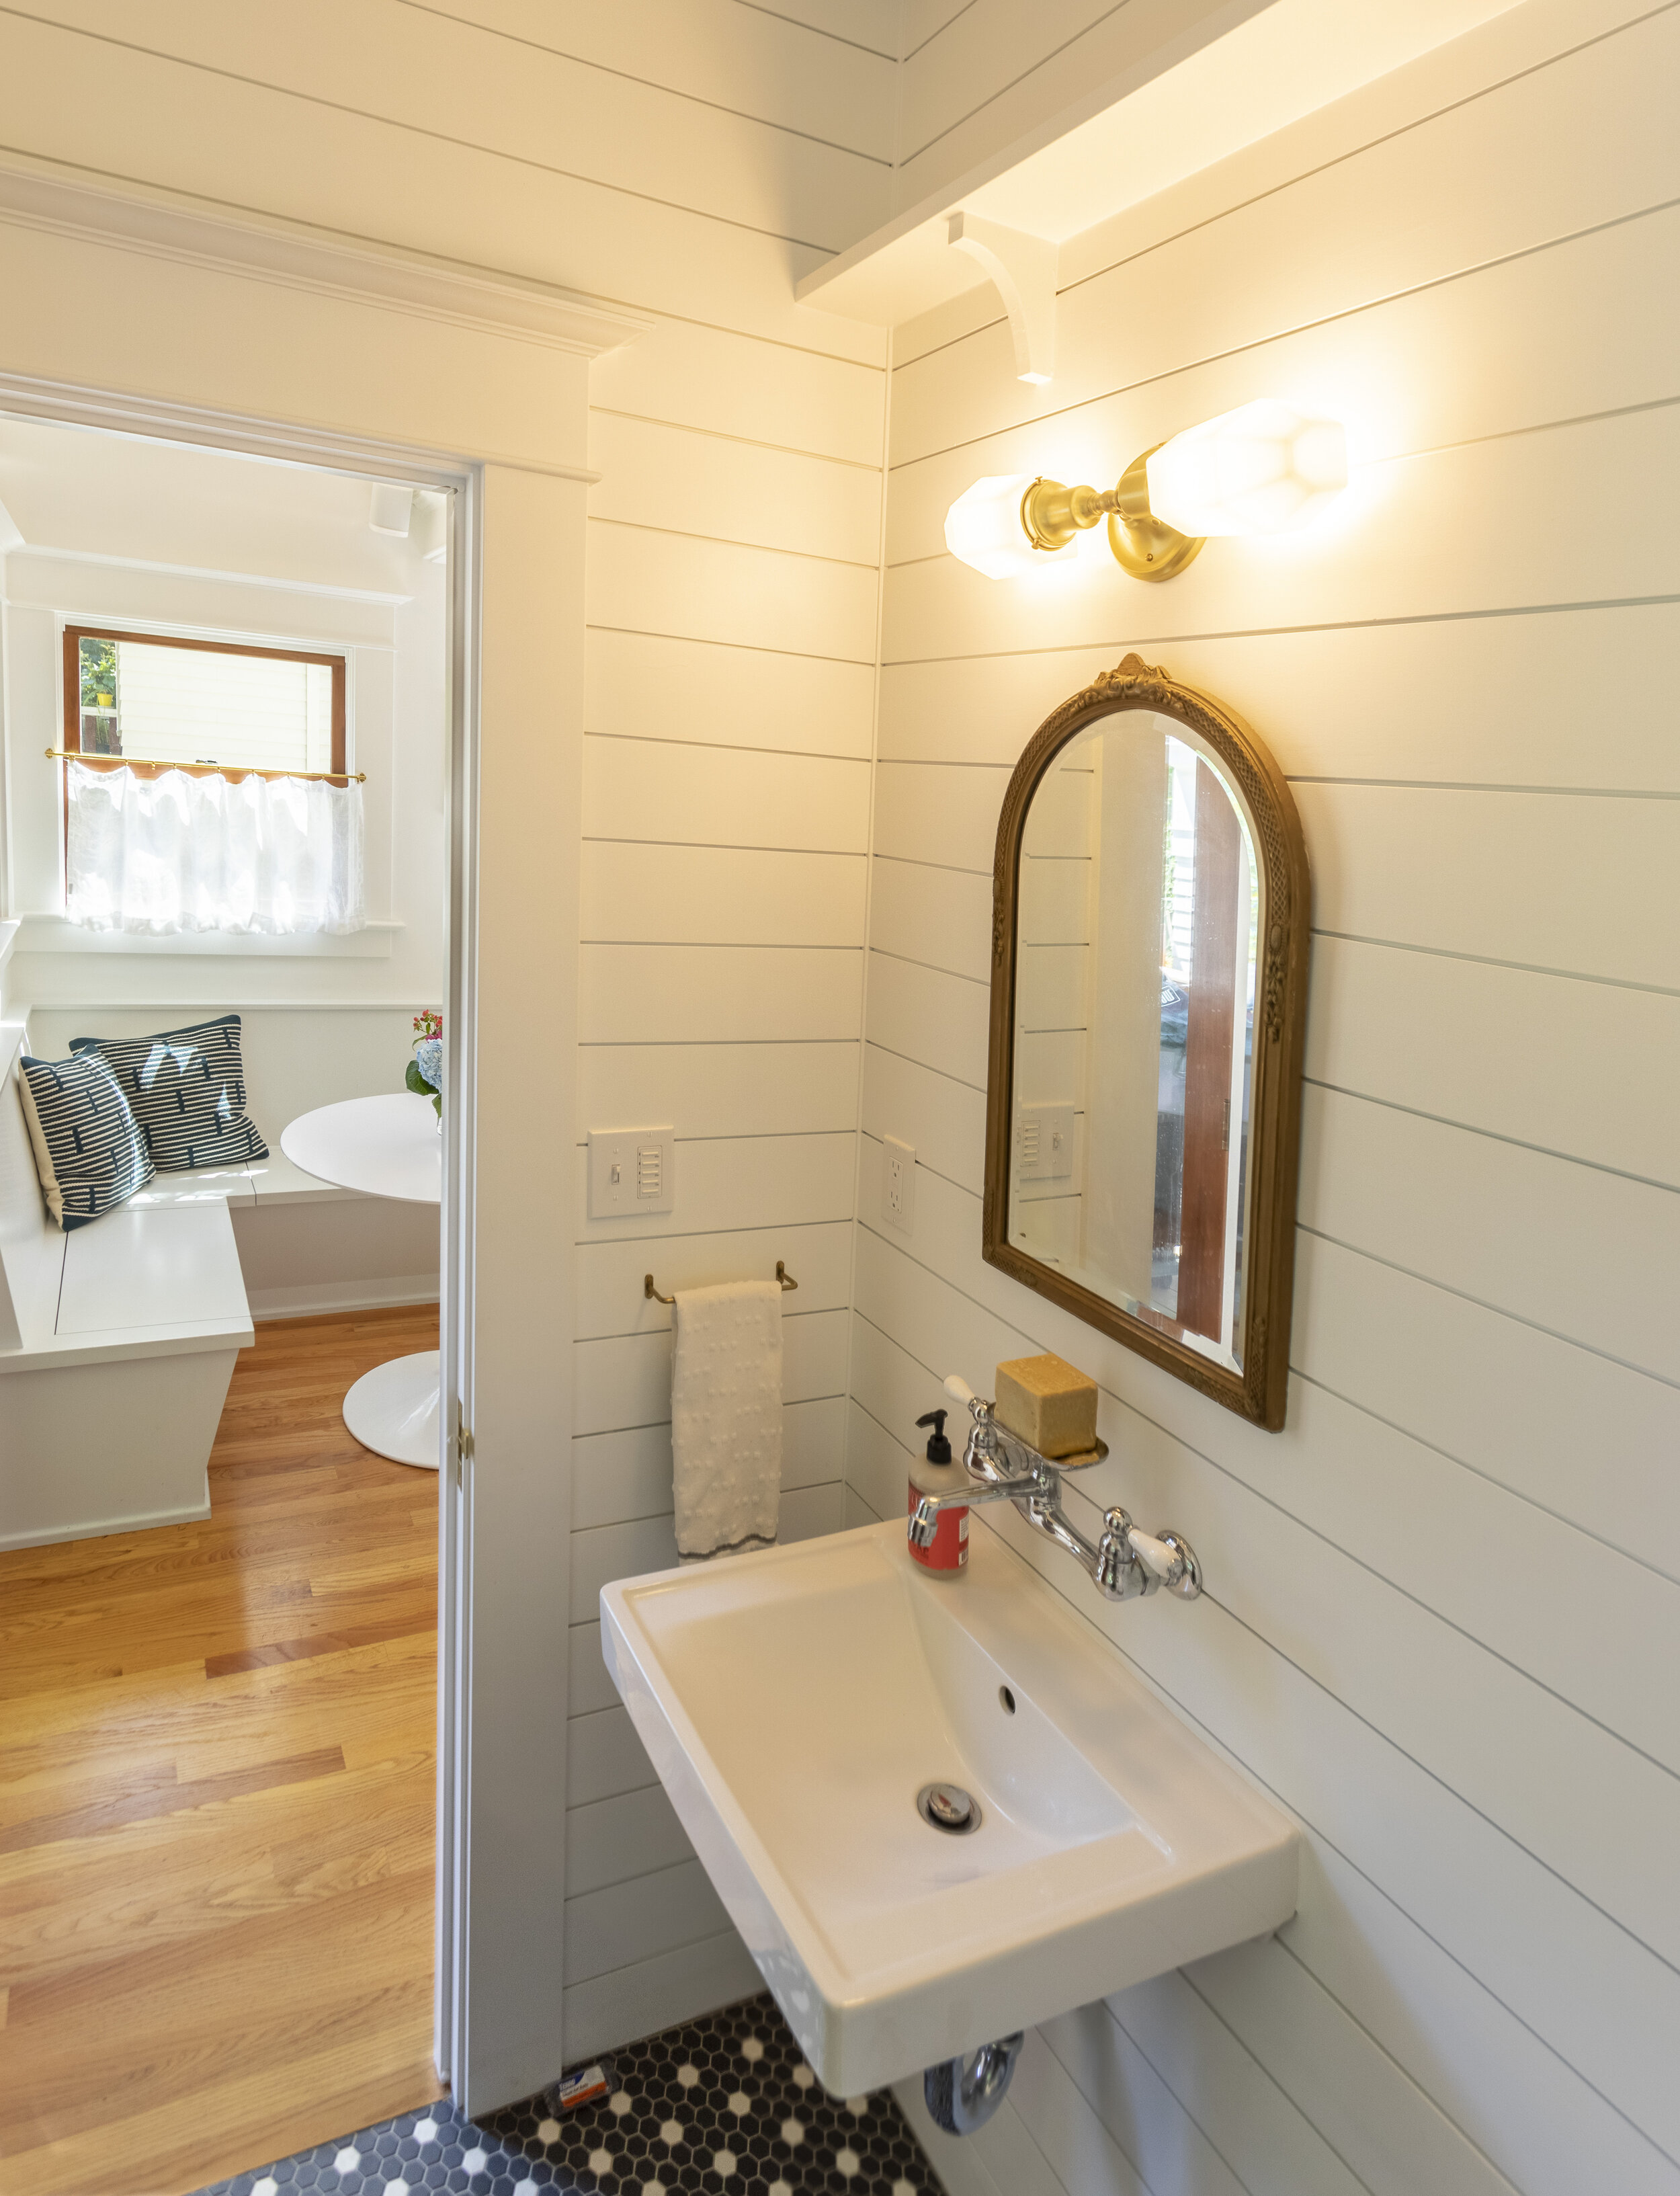 Shiplap in powder room pays homage to old porch.